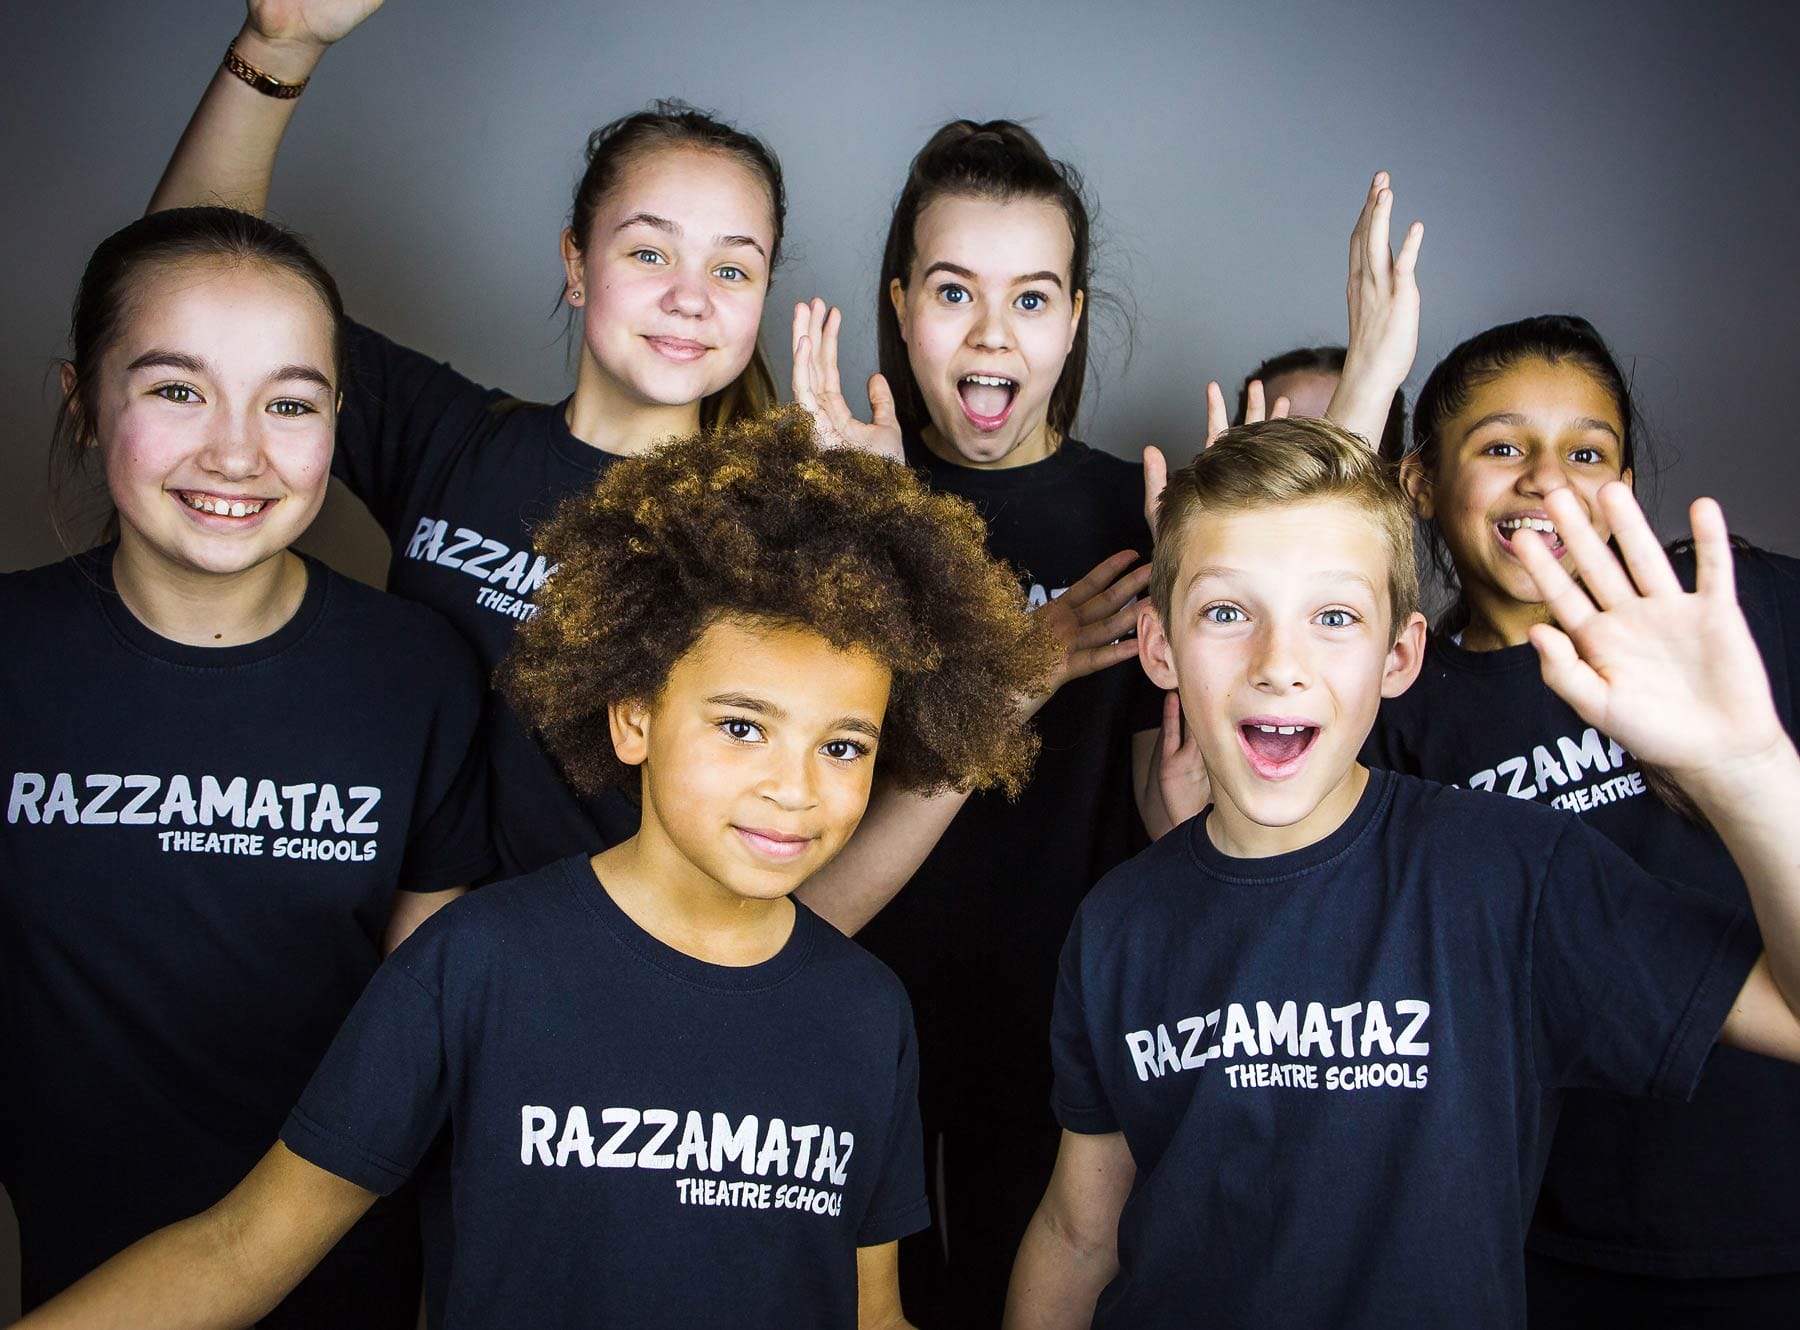 A group of young people striking dynamic poses, all wearing black t-shirts with white text reading RAZZAMATAZ Theatre Schools